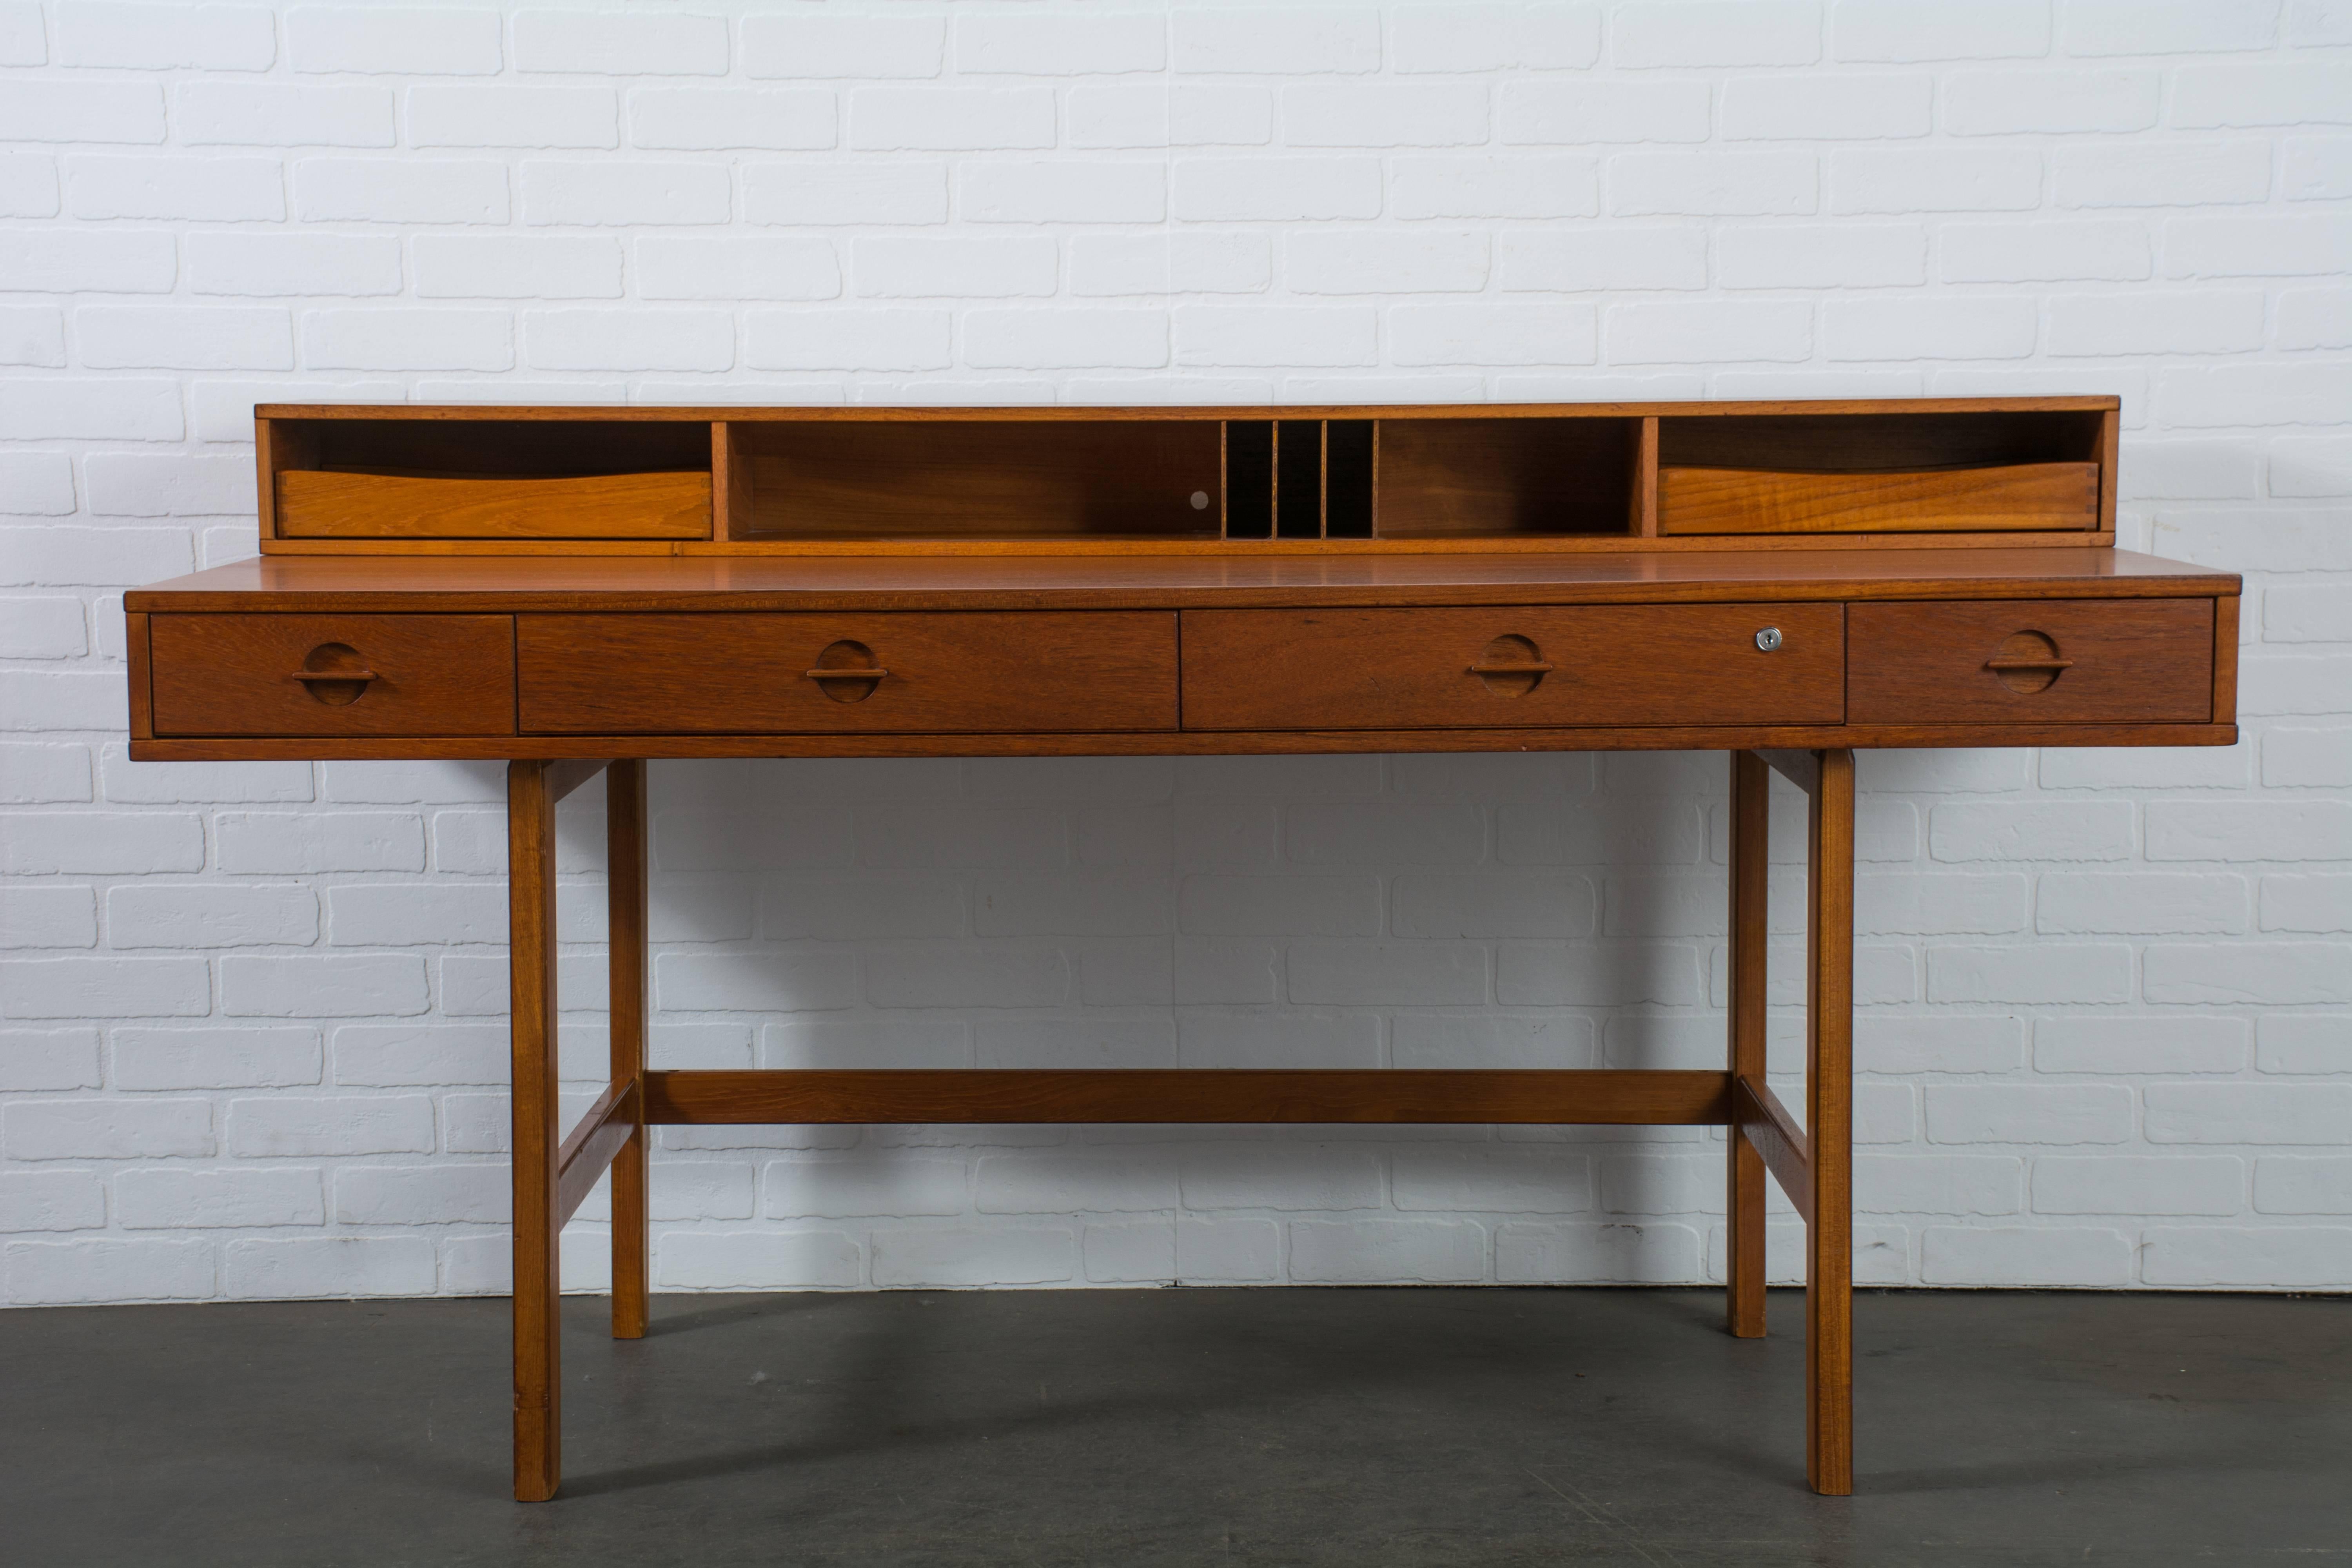 This vintage Mid-Century flip top teak desk was designed by Peter Lovig Nielsen for Lovig in the 1960s, Denmark. The top which includes shelves and small drawers or letter trays can be folded down to extend the space of the desk top or to use it as